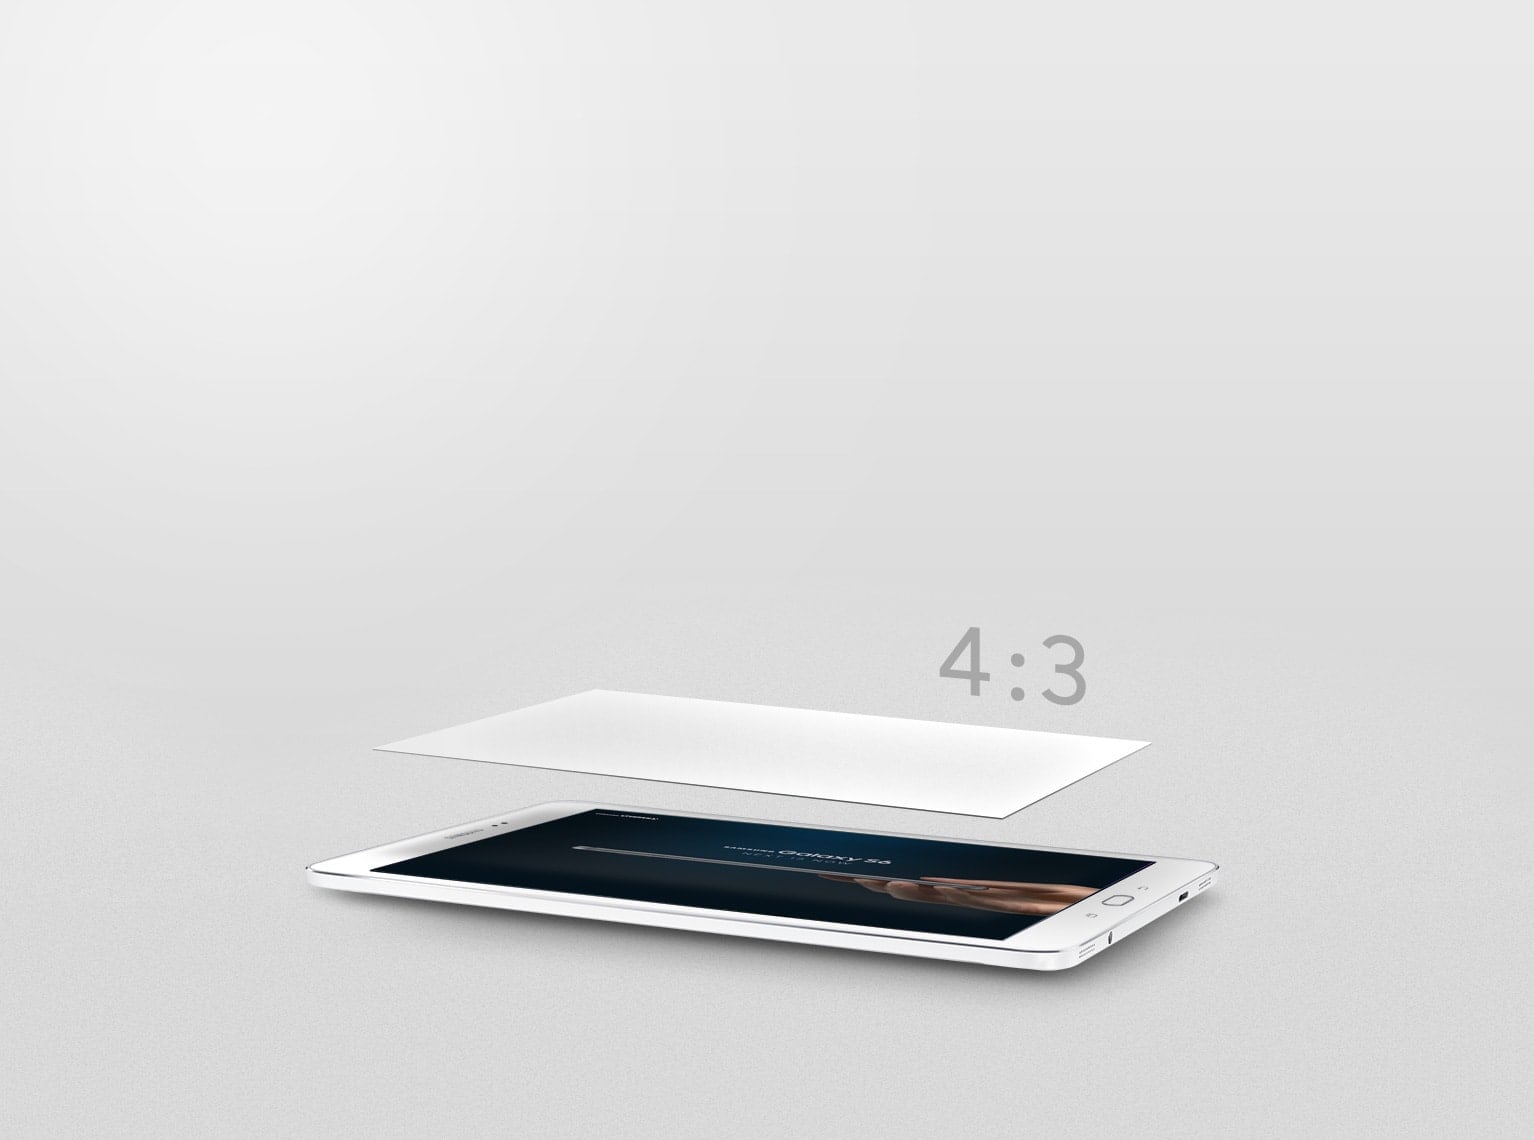 Side-view Of Galaxy Tab S2 Lying Face Up On Flat Surface - Gadget , HD Wallpaper & Backgrounds